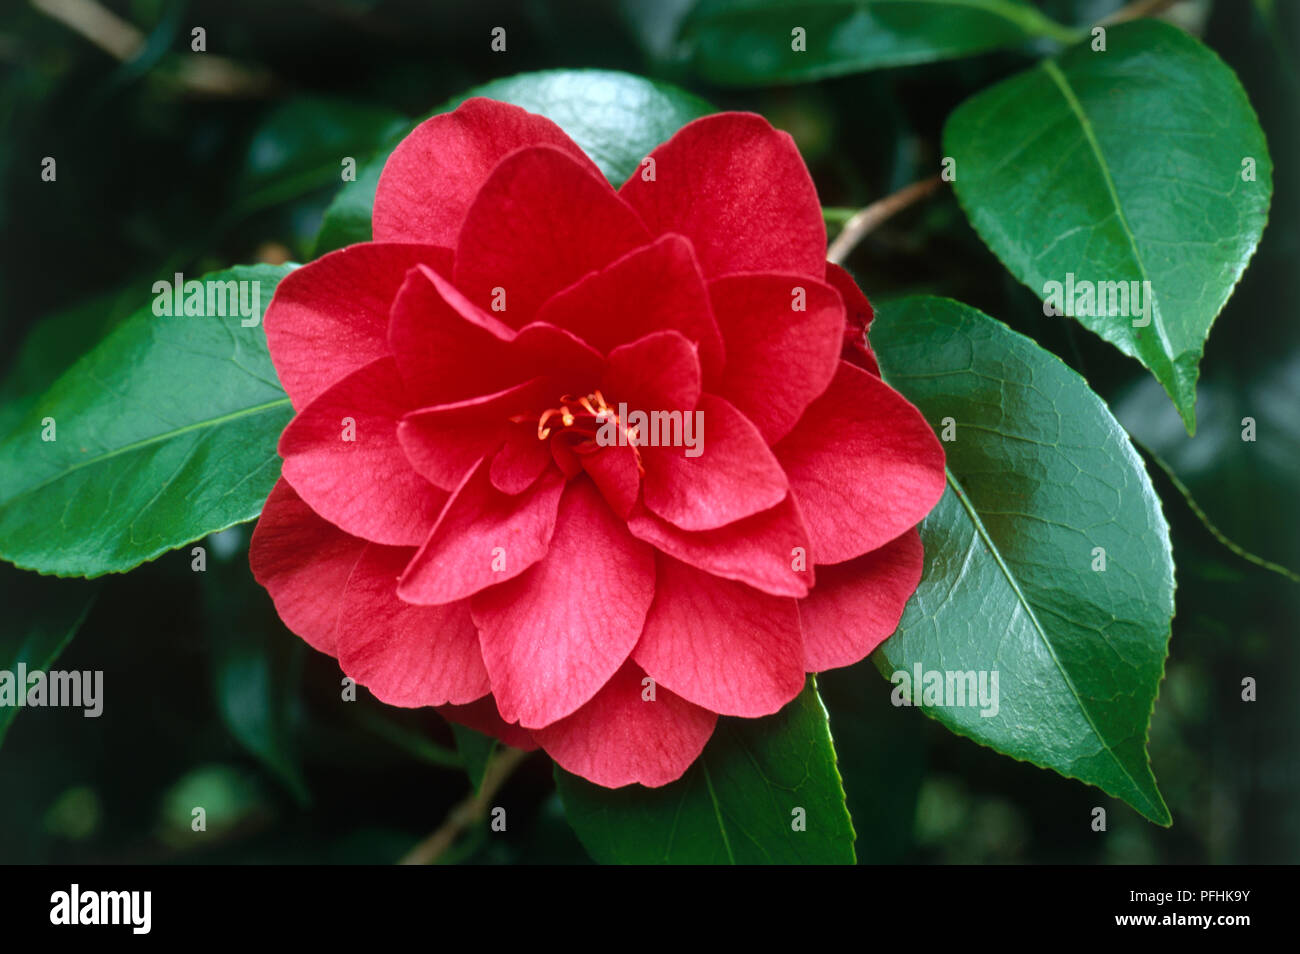 Camellia japonica 'Ace of Hearts' (Japanese camellia), red flower head and evergreen leaves, close-up Stock Photo